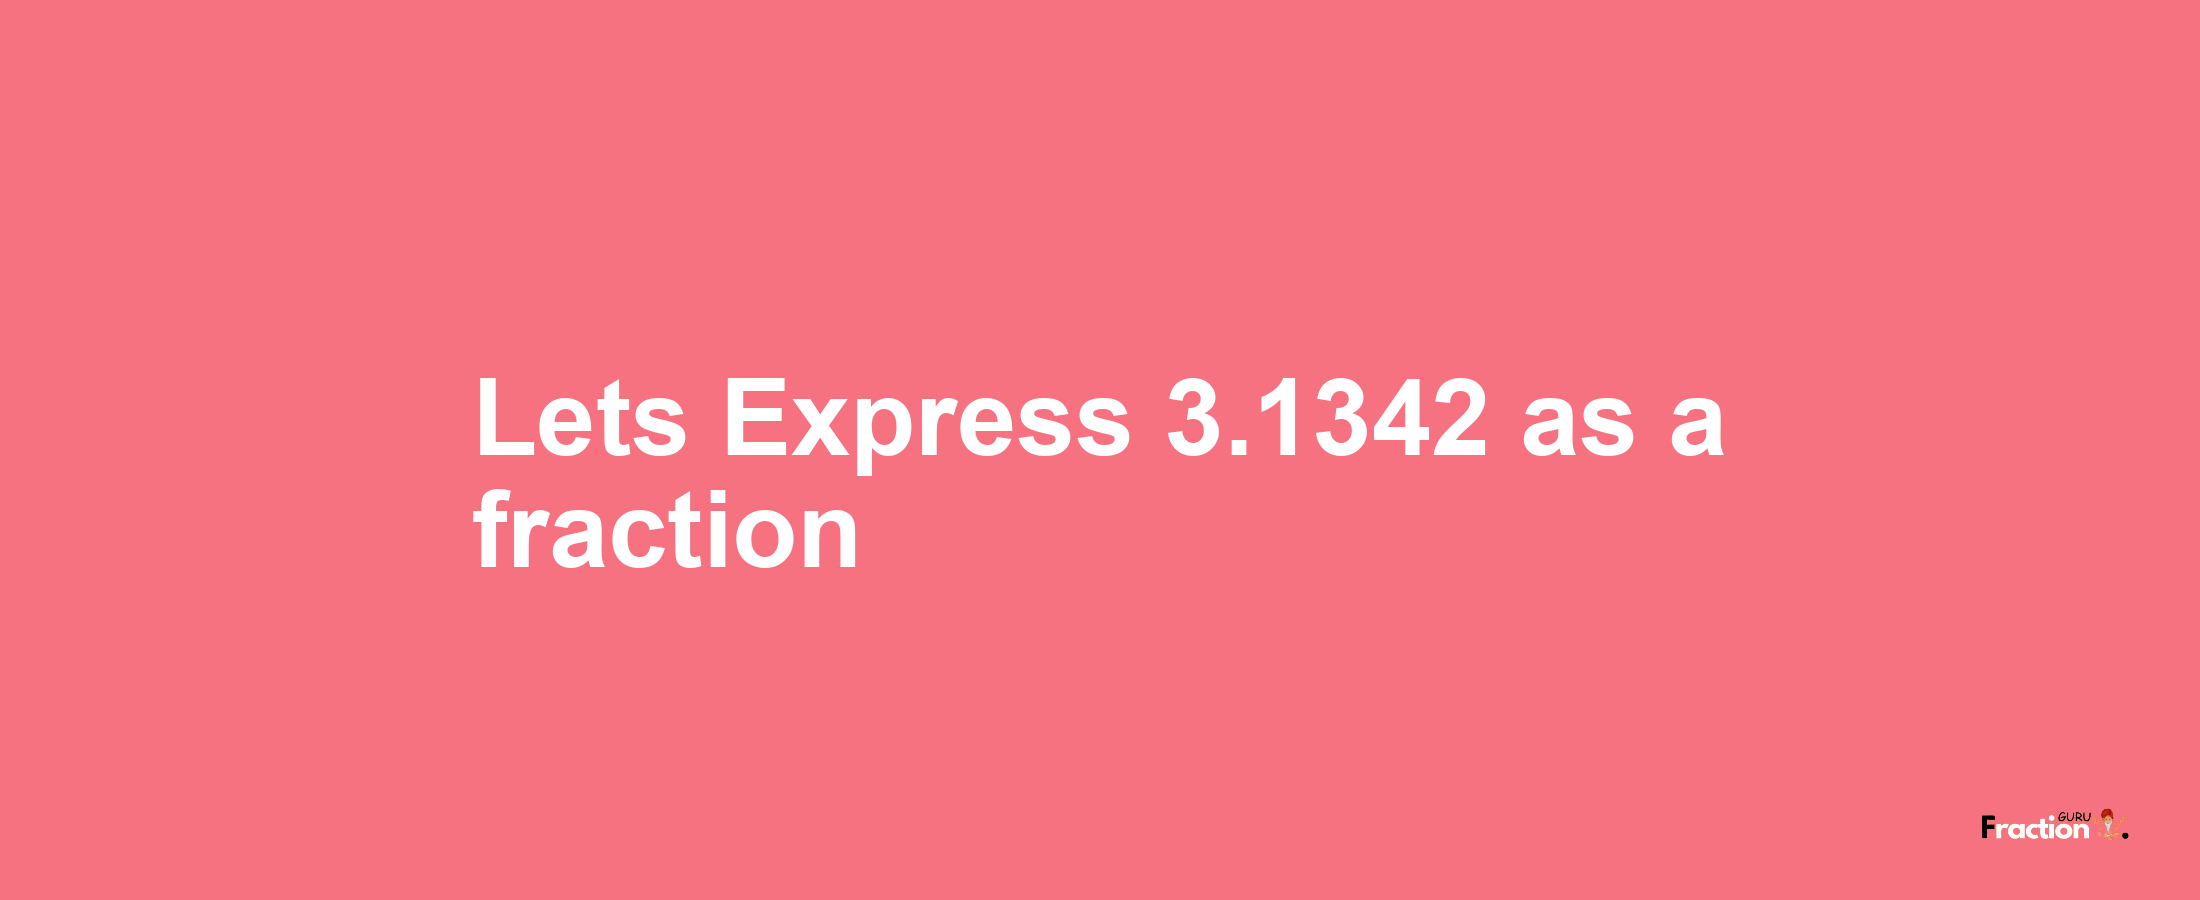 Lets Express 3.1342 as afraction